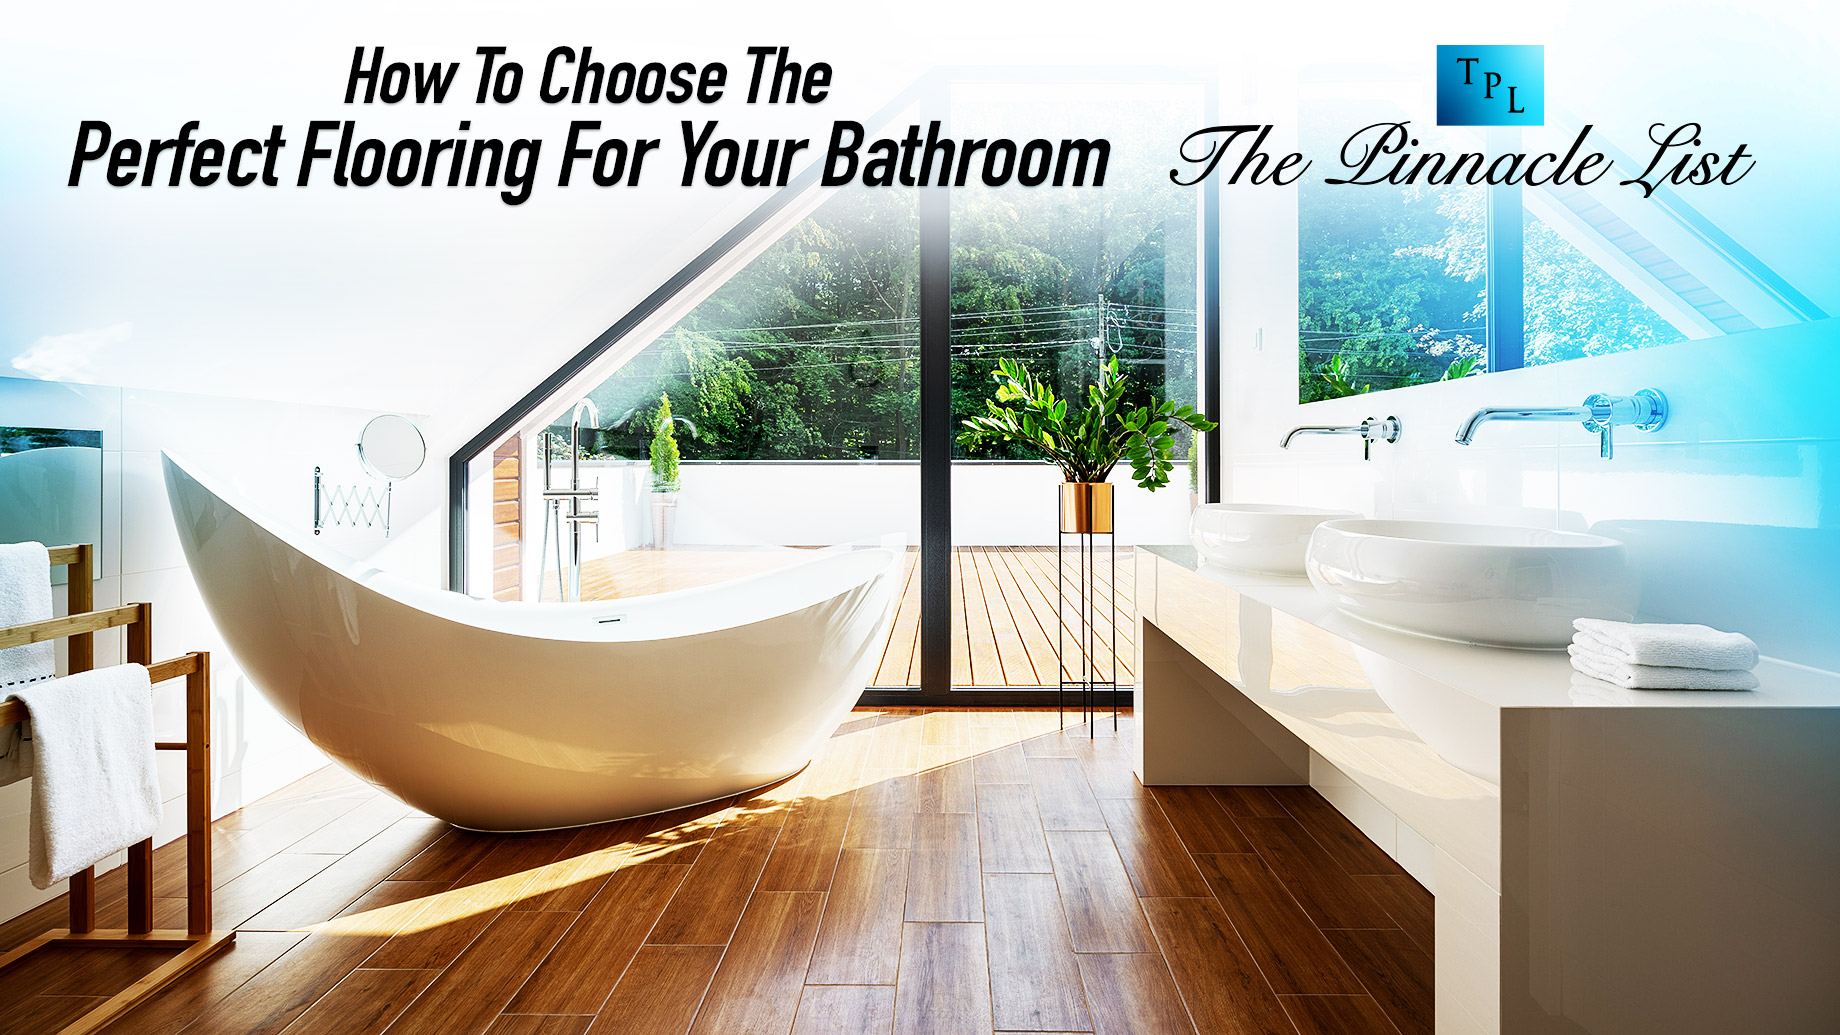 How To Choose The Perfect Flooring For Your Bathroom